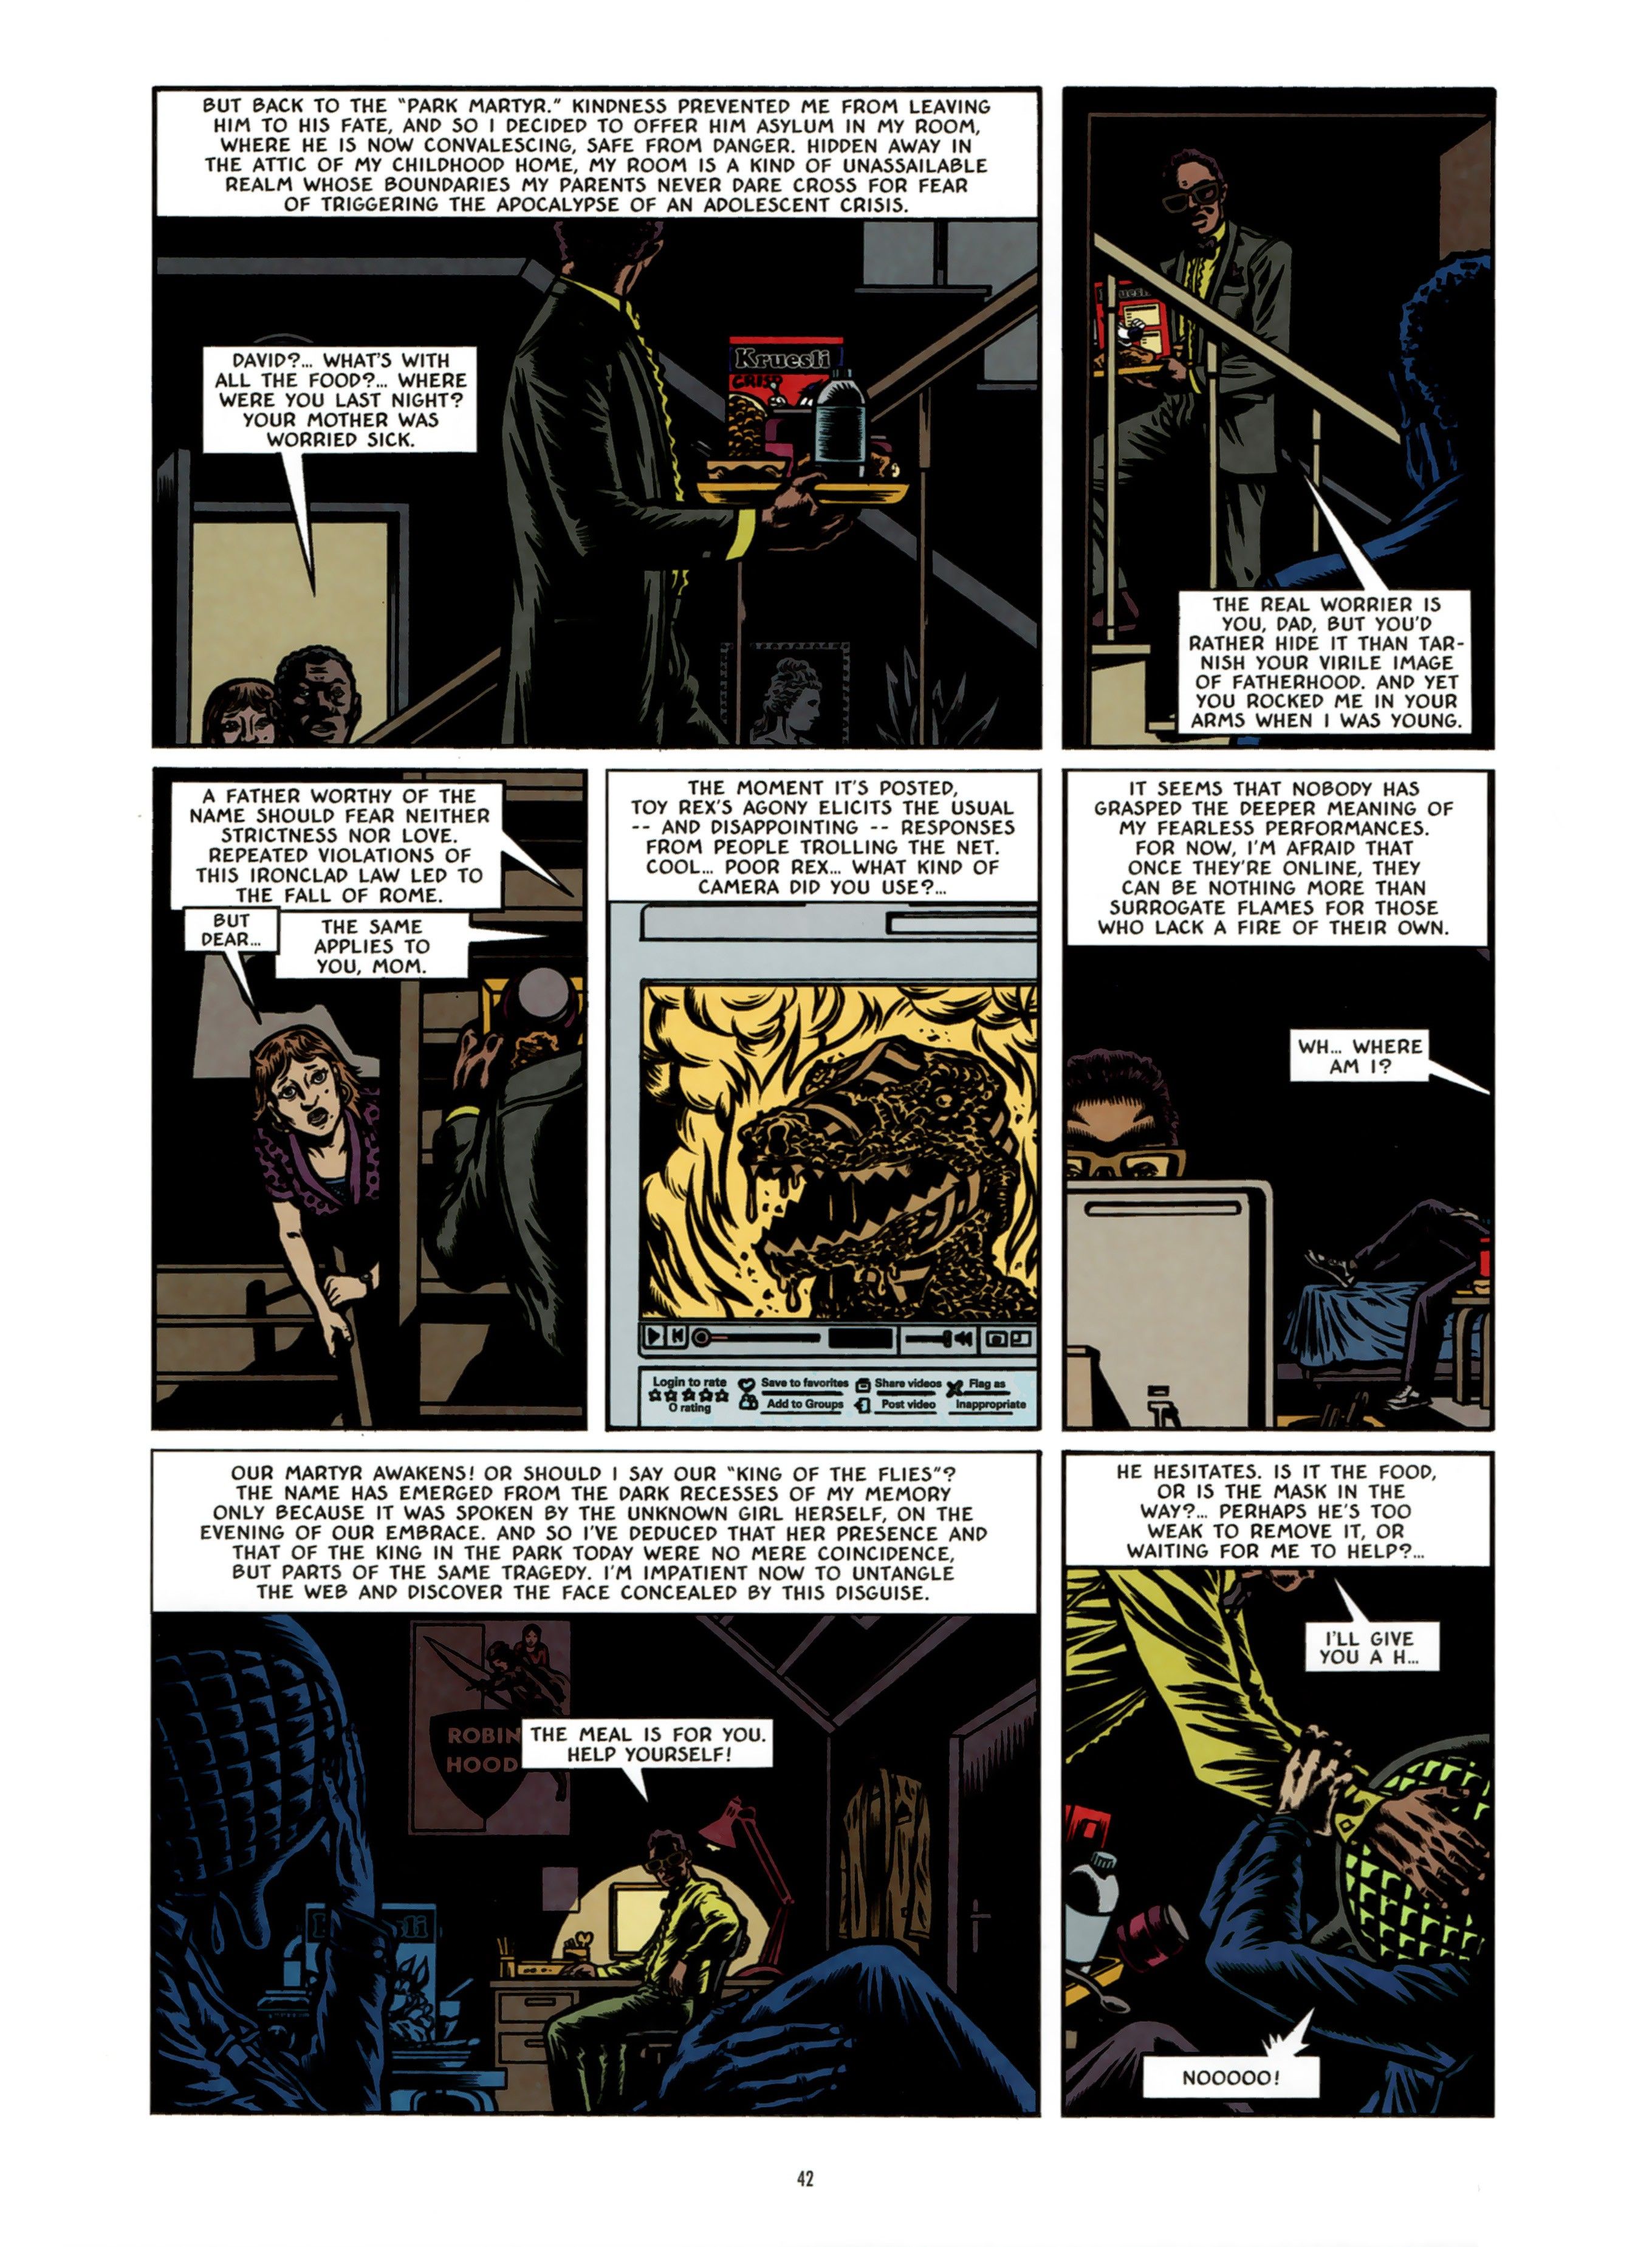 Read online King of the Flies comic -  Issue #2 - 45